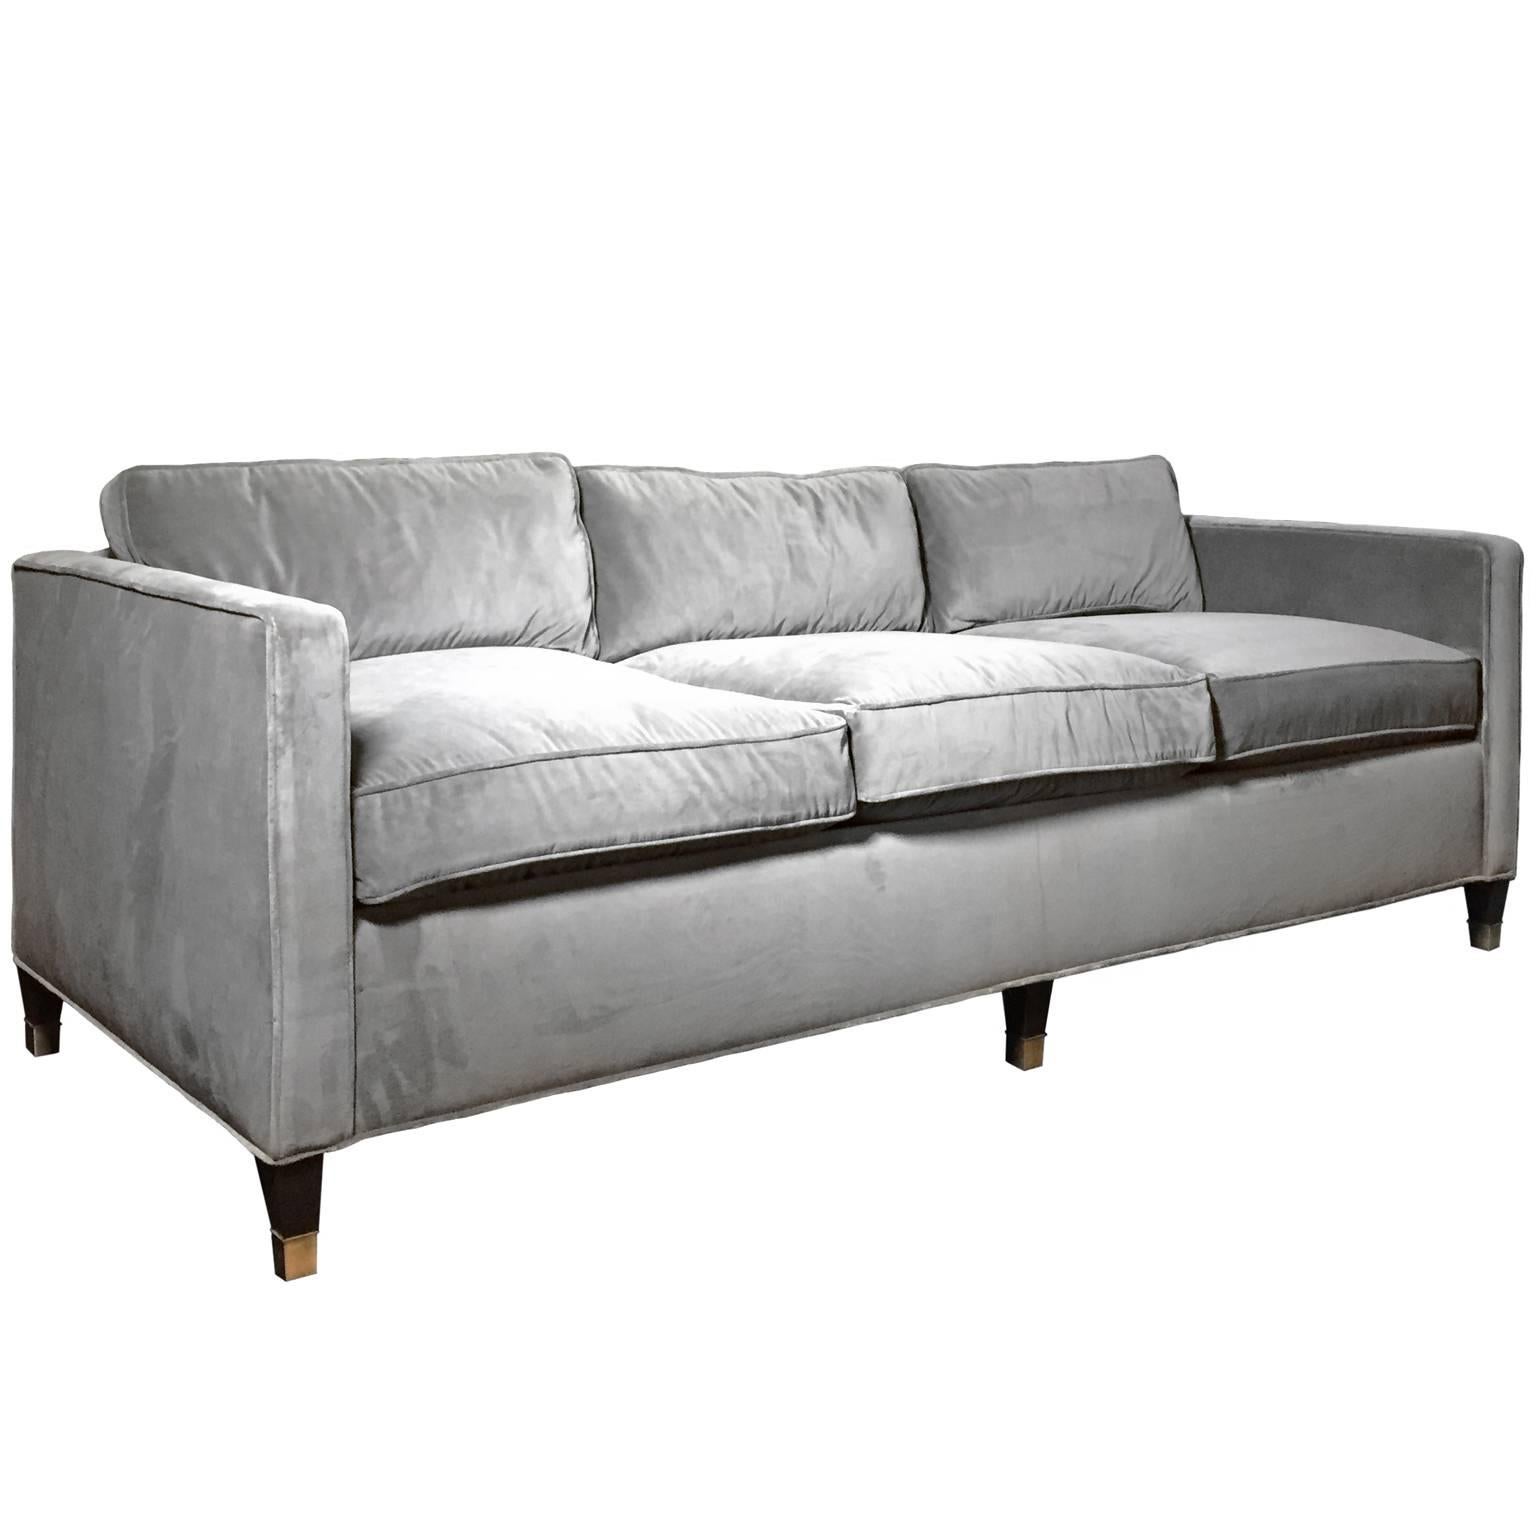 Custom three-seat sofa upholstered in grey velvet with tapered wood legs and brass sabots.